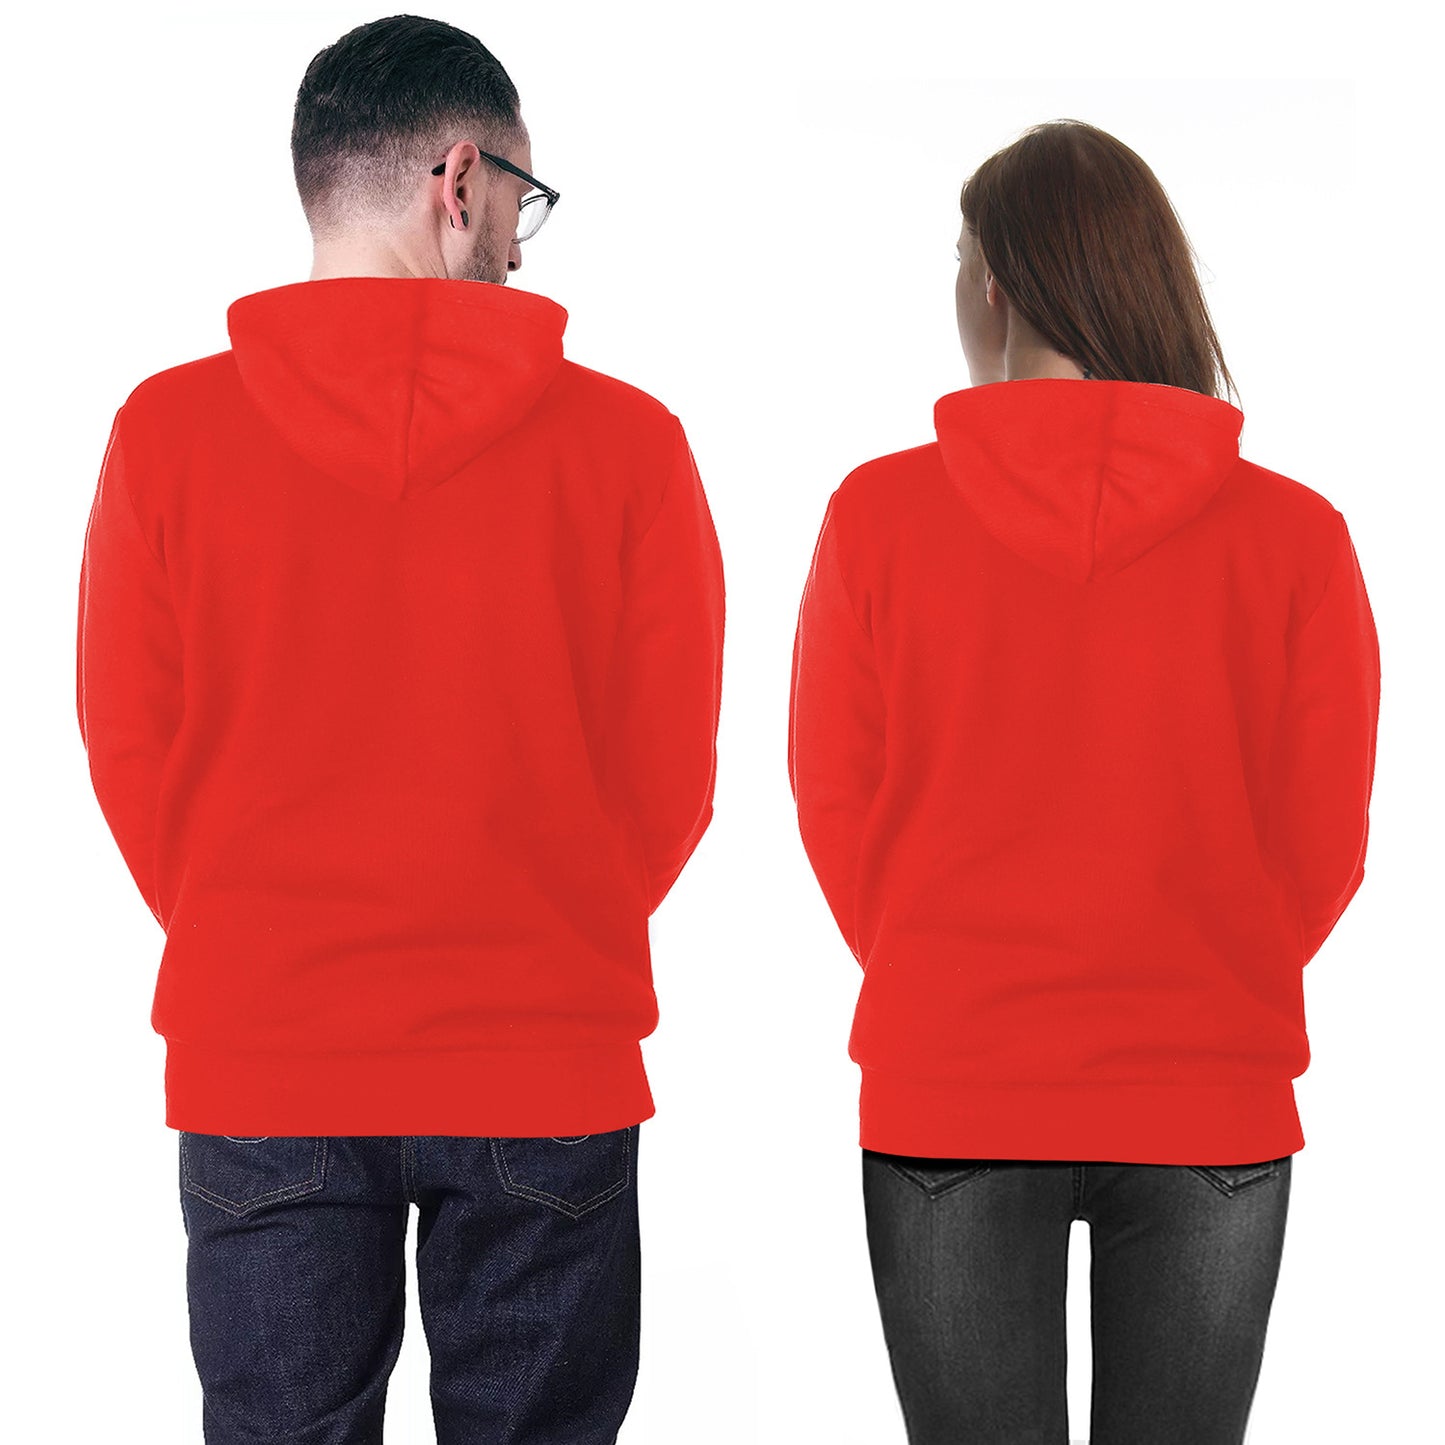 Couple Christmas Bear Print Casual Sports Hooded Pullover Sweater